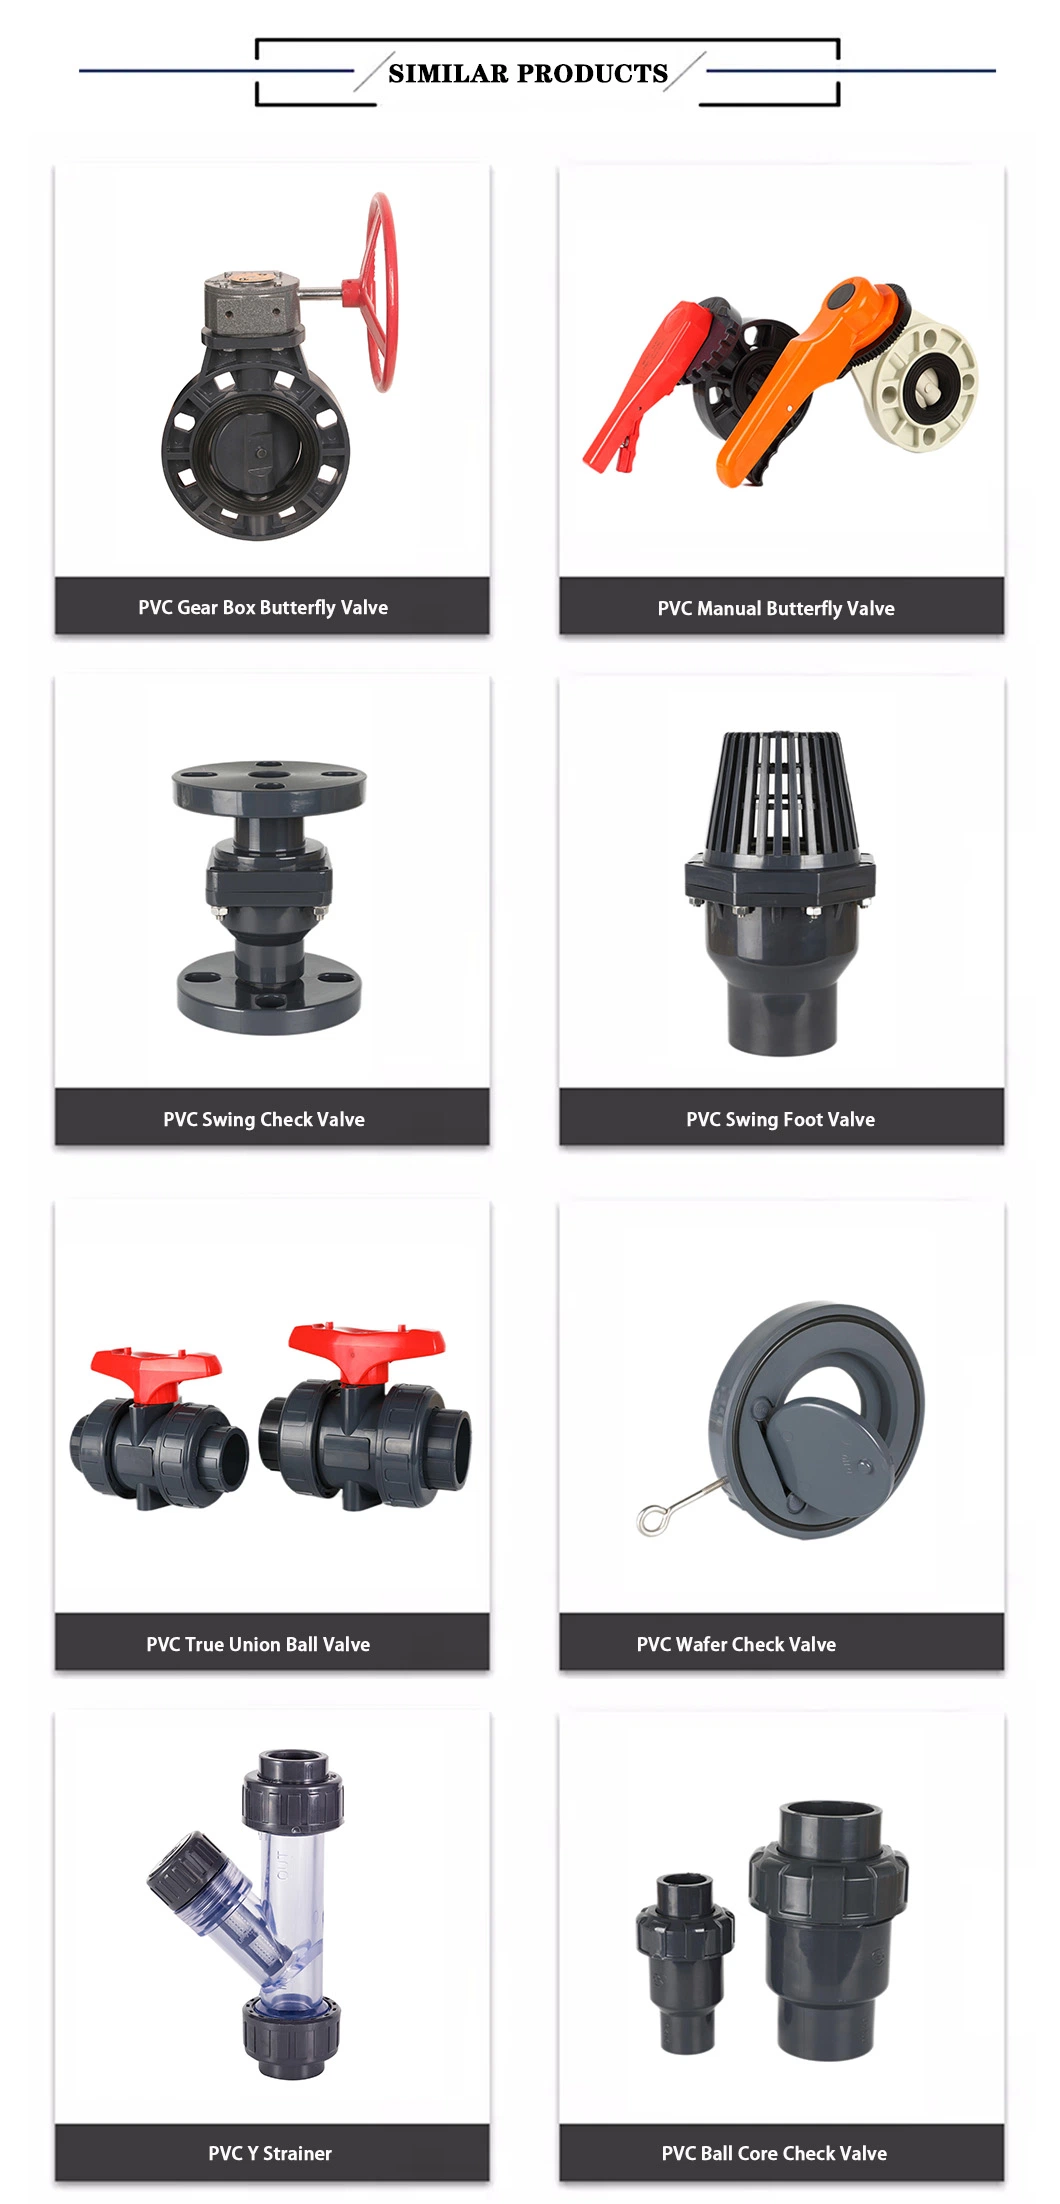 Cast Iron Ductile Iron Ggg40 Double Eccentric Offset Manual/Actuator Flanged PVC Gear Box Butterfly Valve